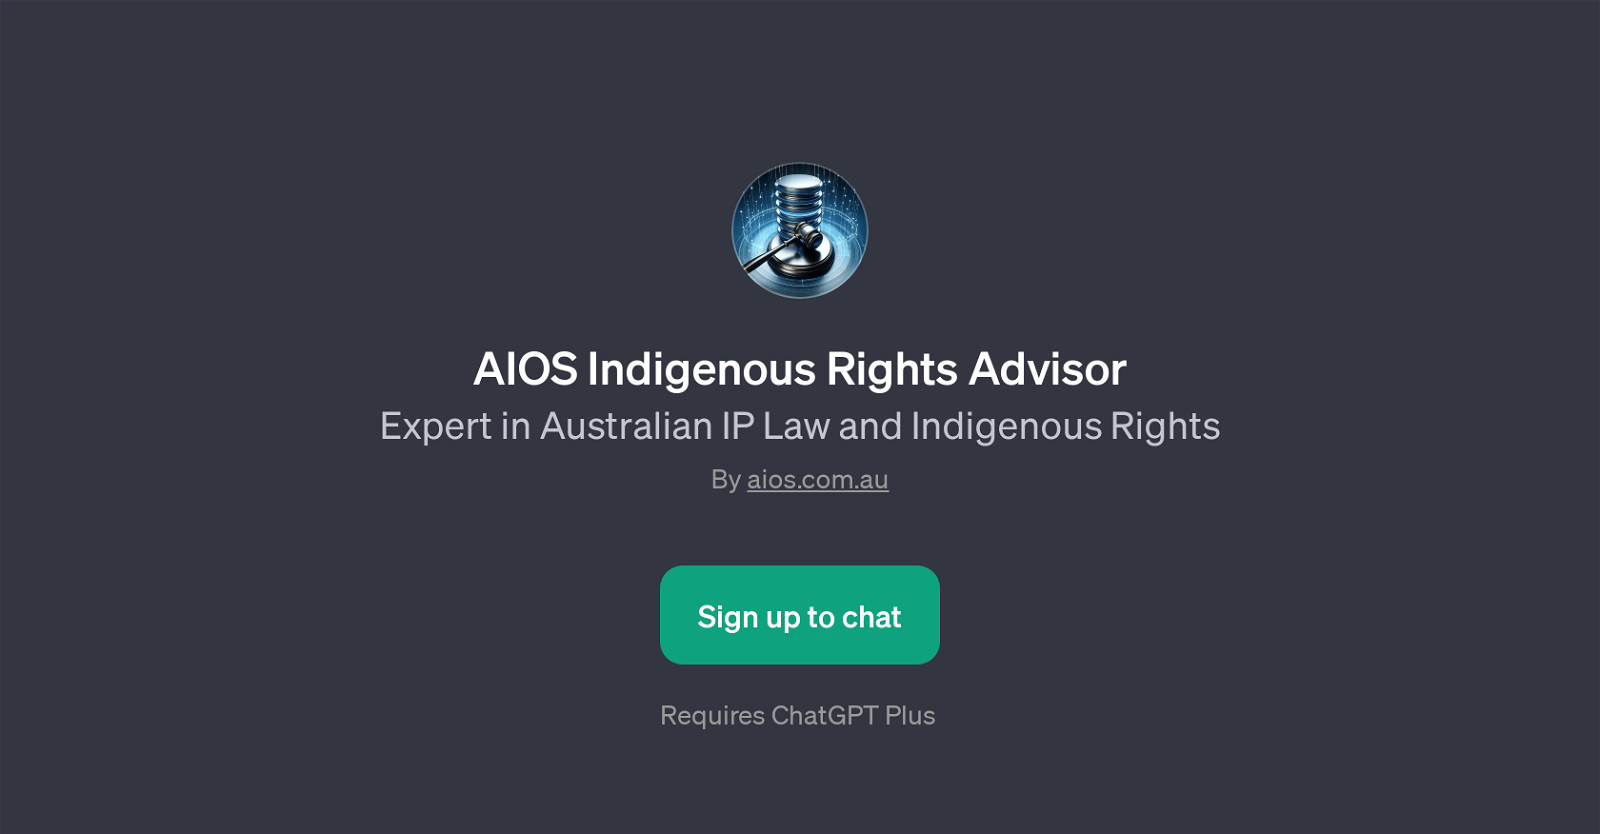 AIOS Indigenous Rights Advisor website